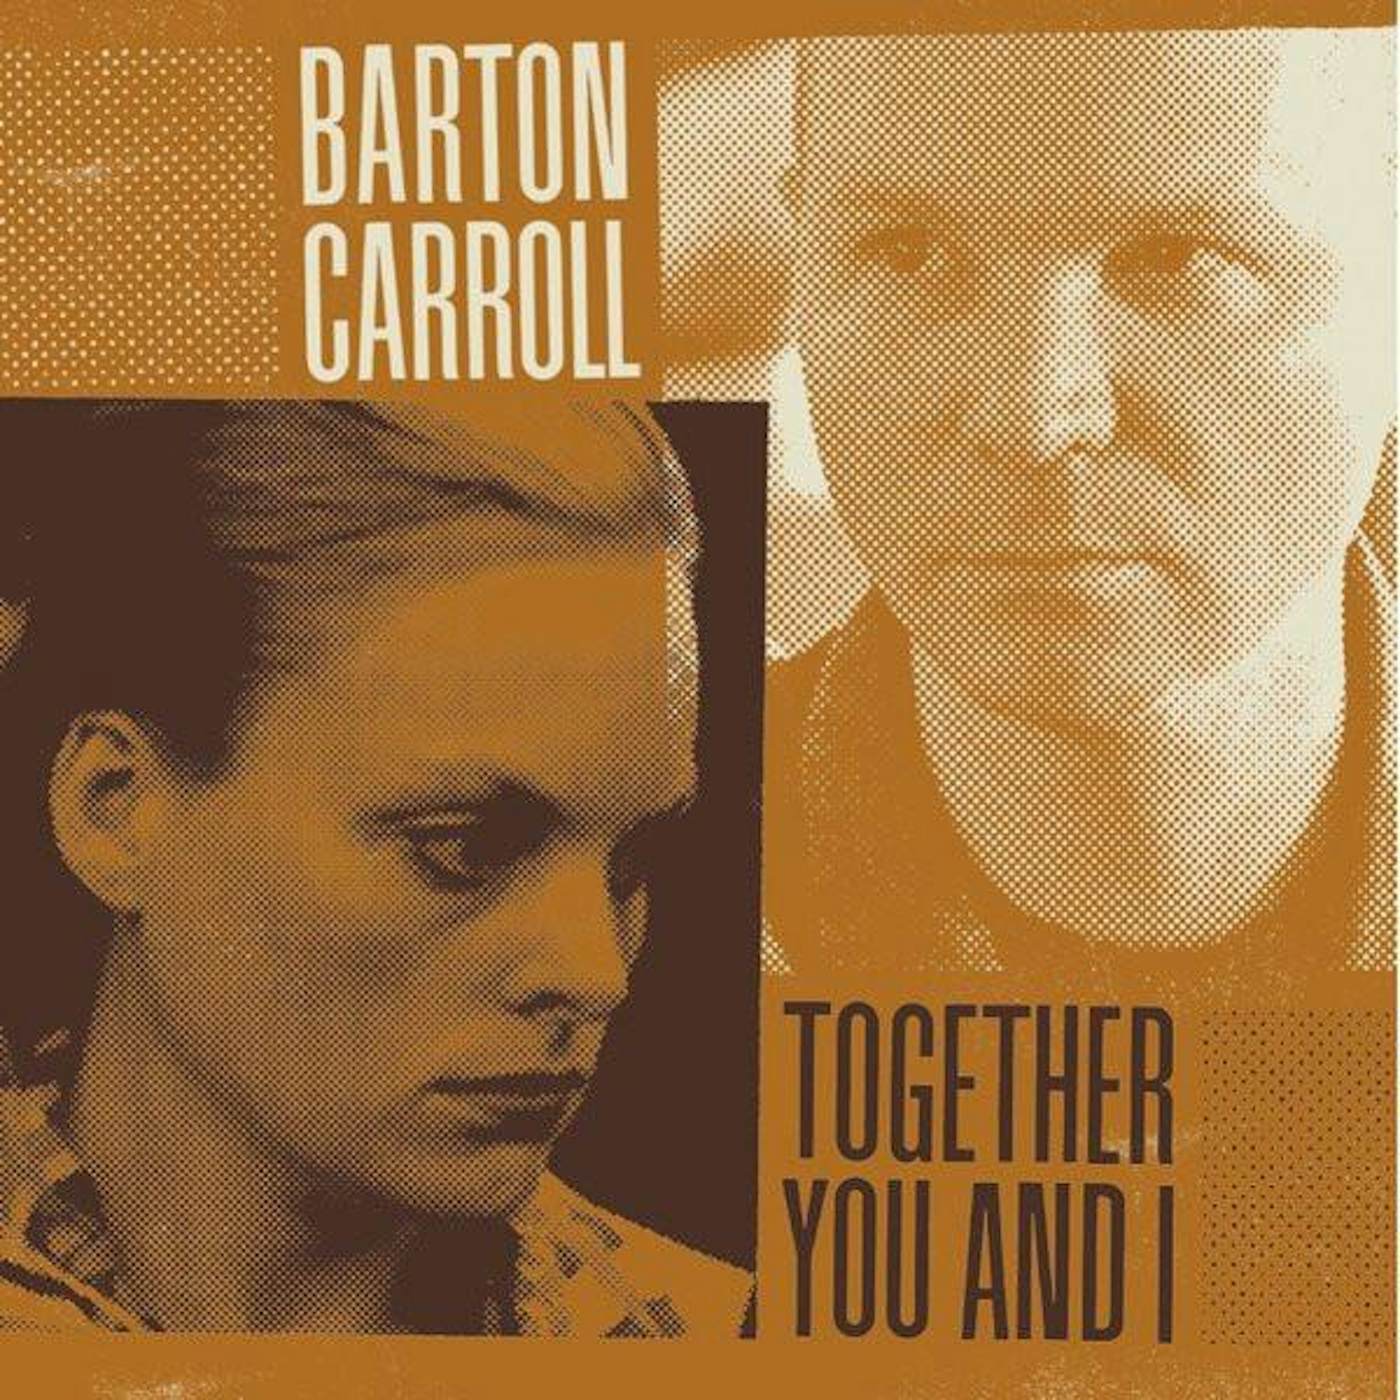 Barton Carroll Together You and I Vinyl Record